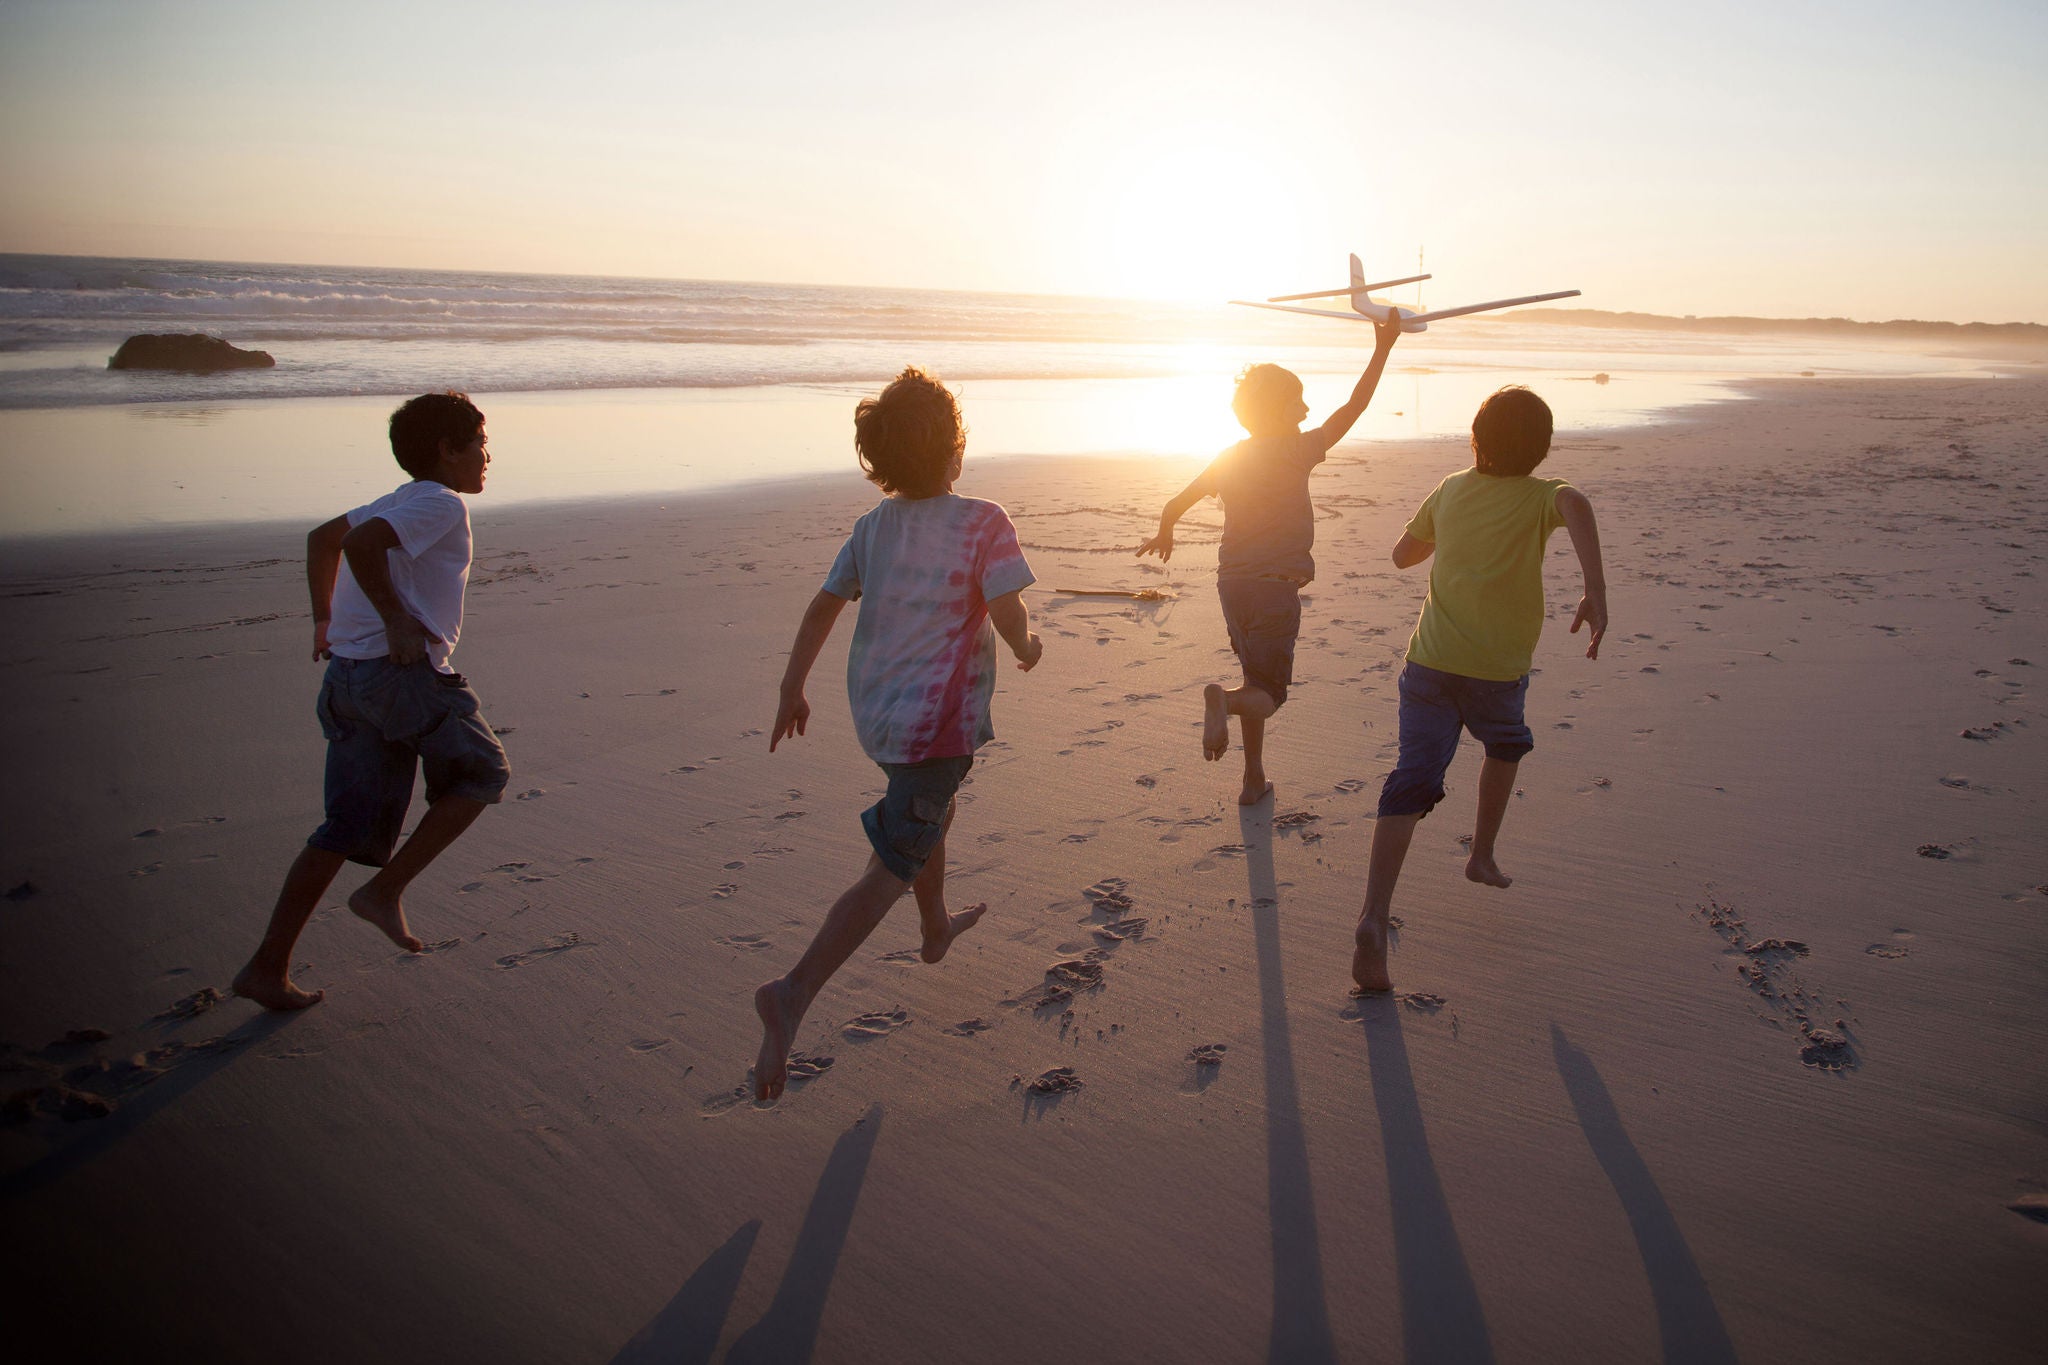 Boys, aged 9-10,  running along a beach at sunset with a toy plane